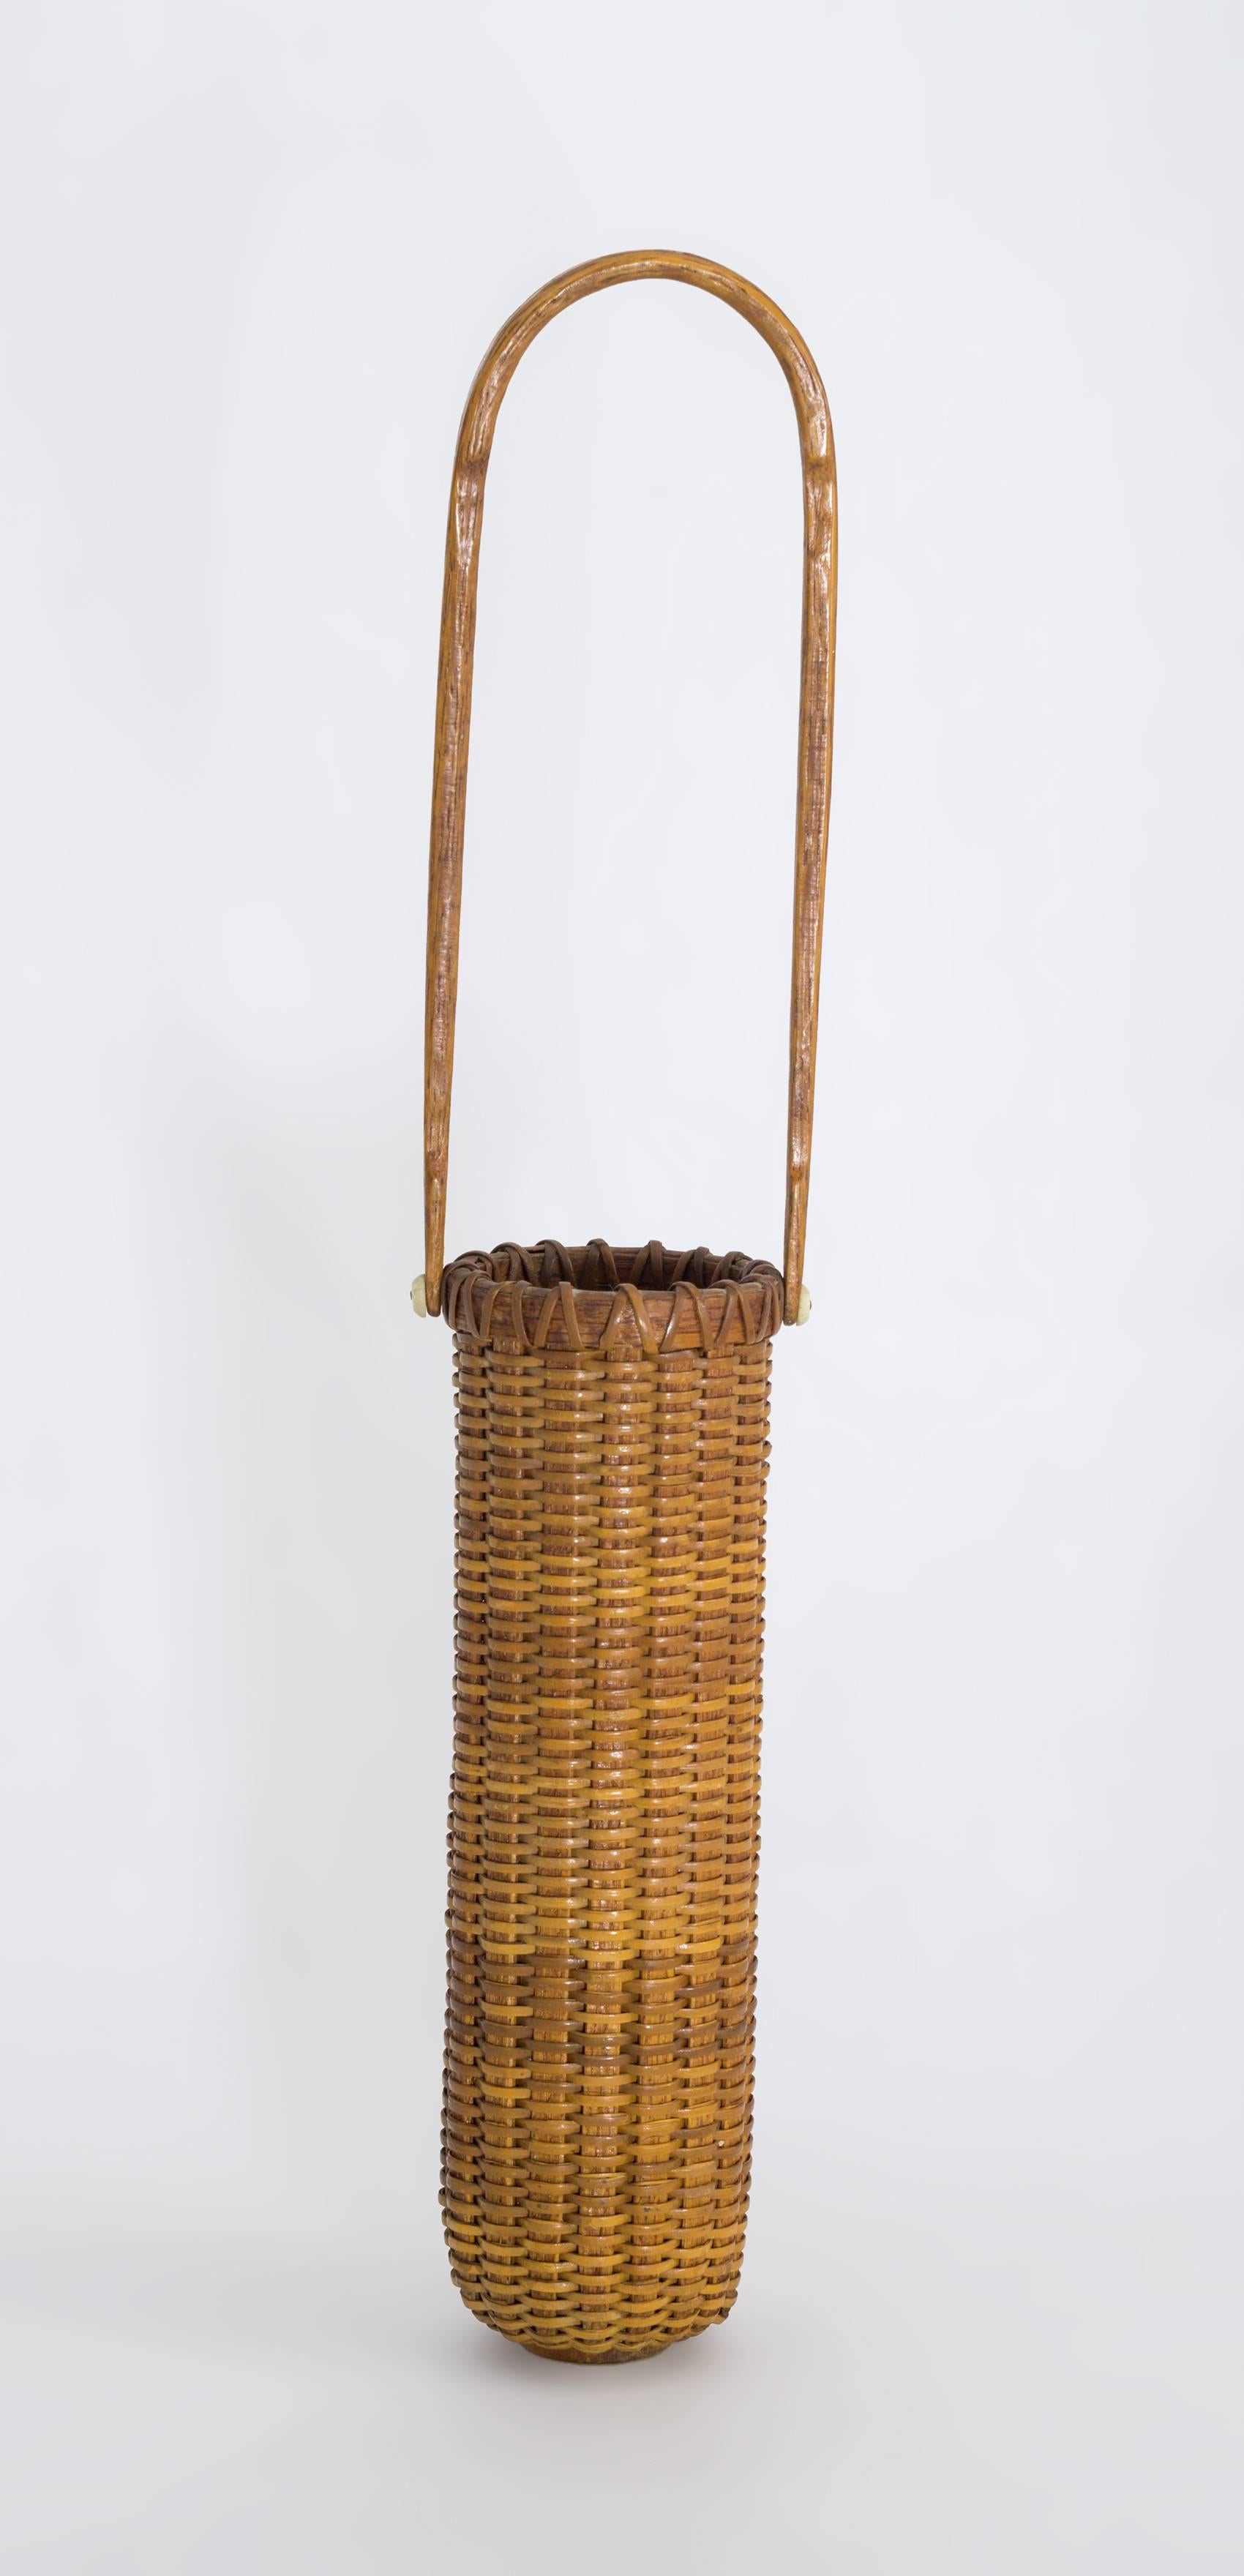 The basket has a glass liner with a elongated swing handle and has a nice rich honey patina. Paul Willer made Nantucket lightship baskets at the House of Orange from the 1970s thru the 1990s. His baskets have become highly collectible.